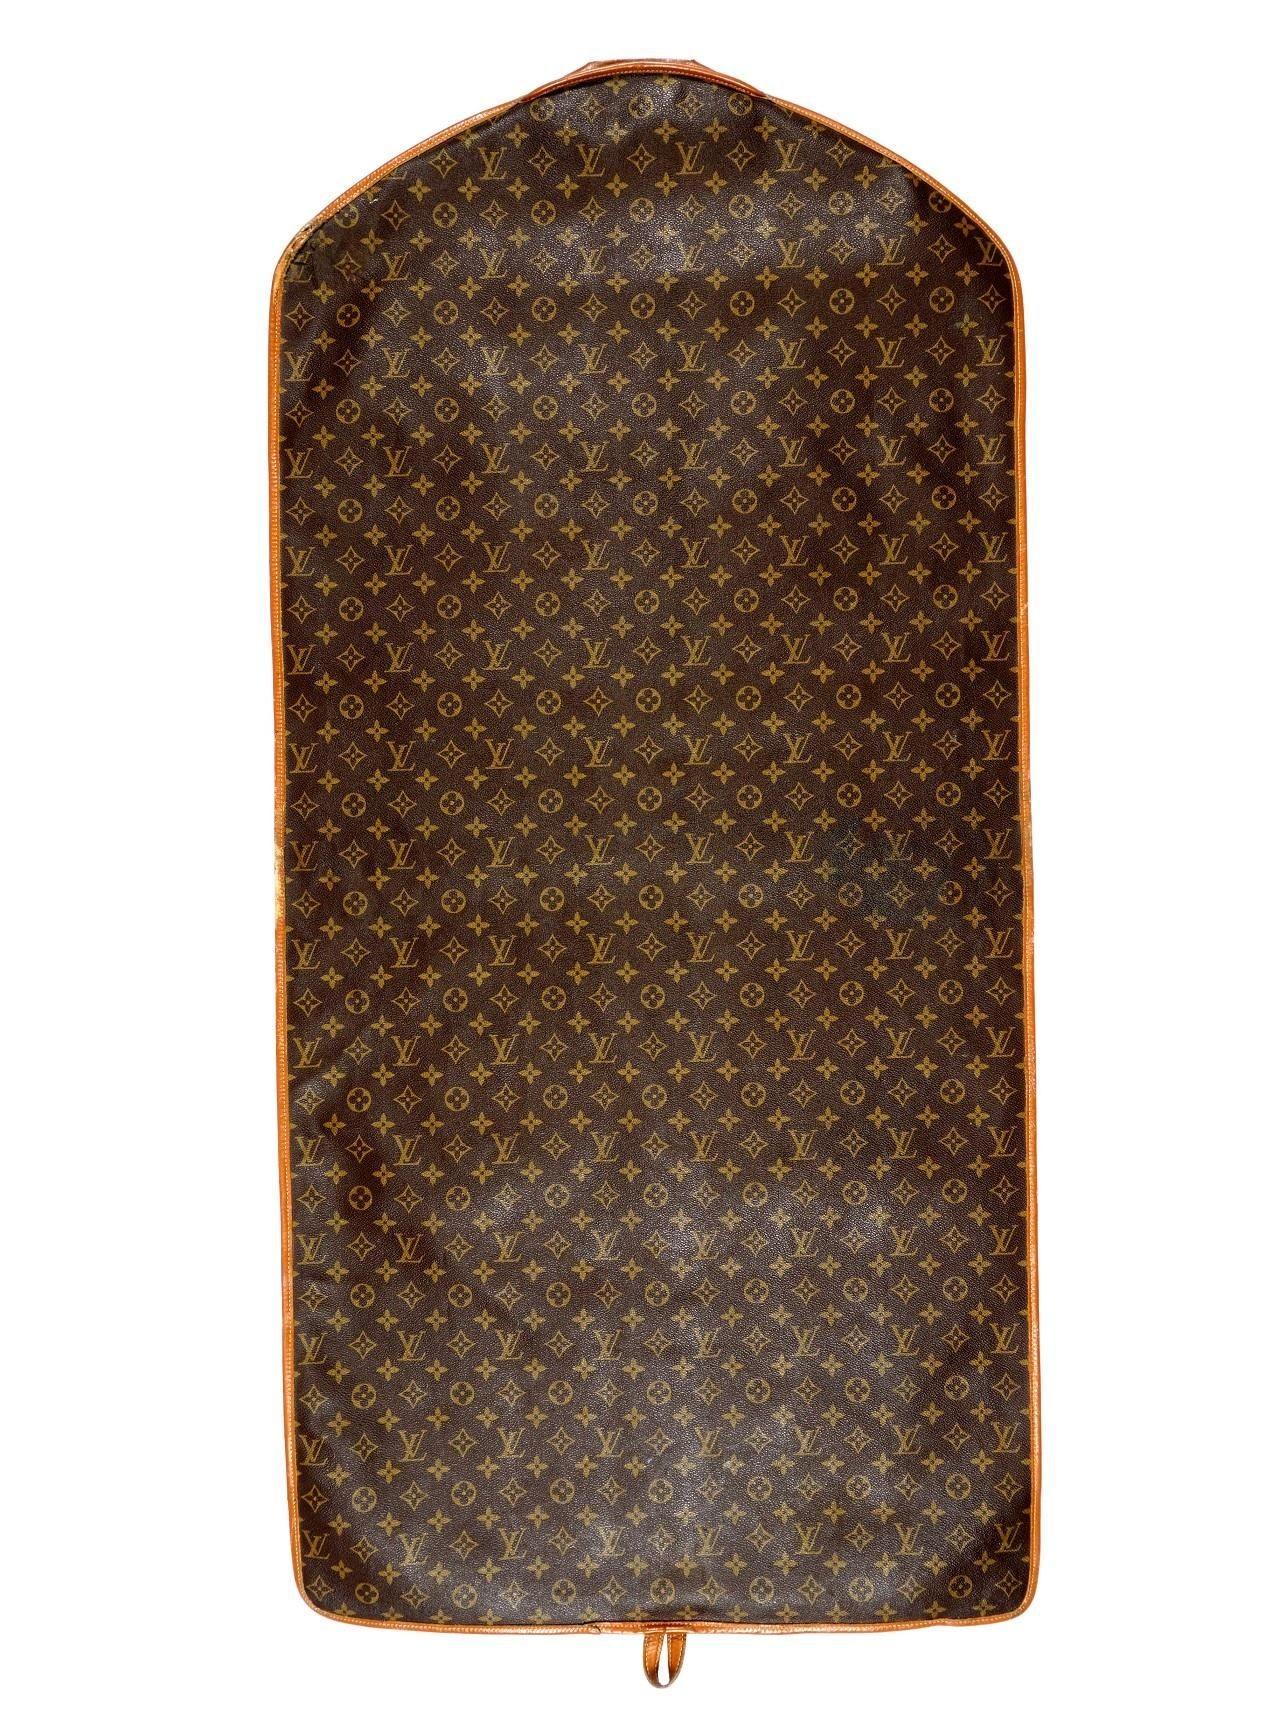 Vintage Louis Vuitton monogram garment bag represents the epitome of luxury travel and refined style. The exterior of the bag is adorned with the renowned LV monogram pattern and vachetta leather details. It also includes an 